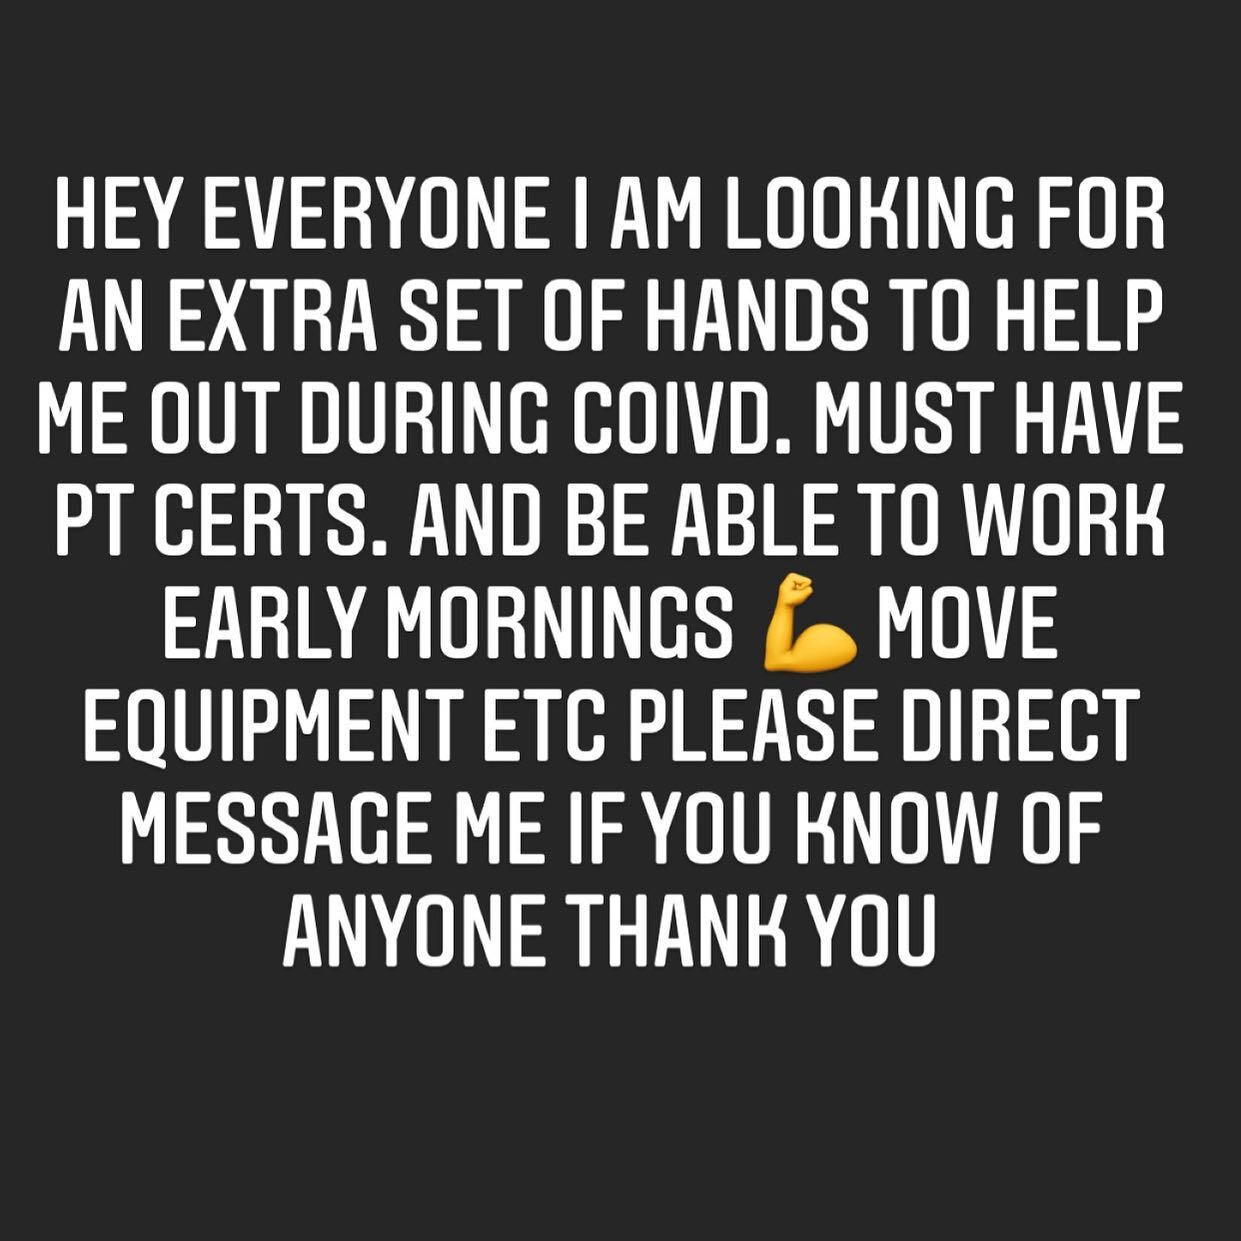 HEY EVERYONE I AM LOOKING FOR AN EXTRA SET OF HANDS TO HELP ME OUT DURING COIVD. MUST HAVE PT CERTS. AND BE ABLE TO WORK EARLY MORNINGS 💪 THANK YOU DINNY